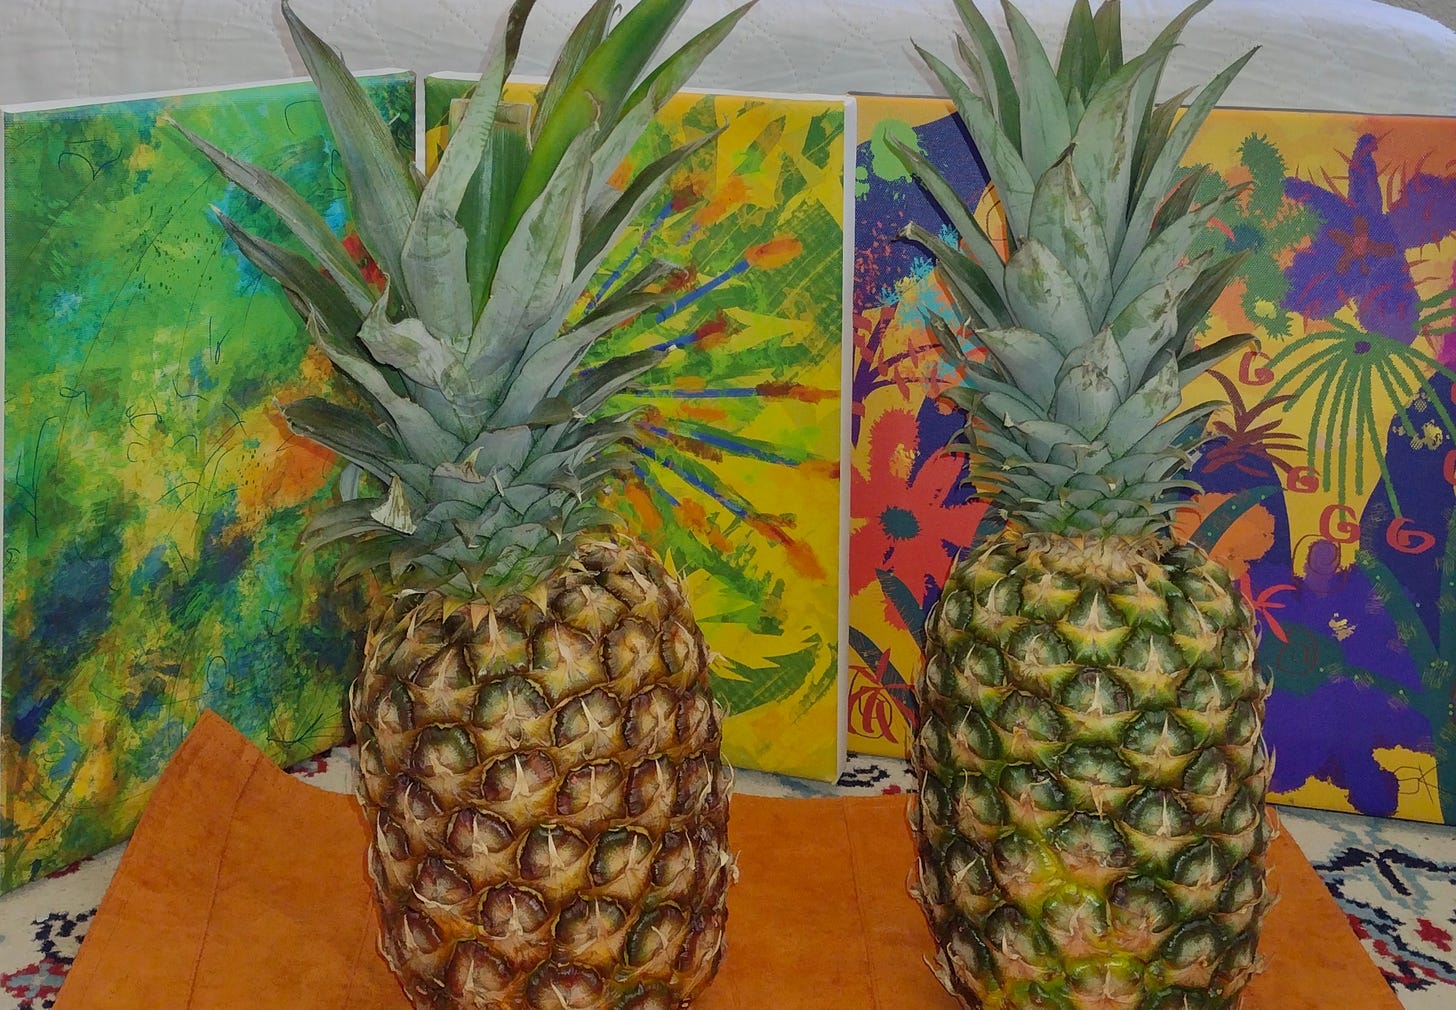 Colorful artwork by Sherry Killam of two upright pineapples against folding screens.